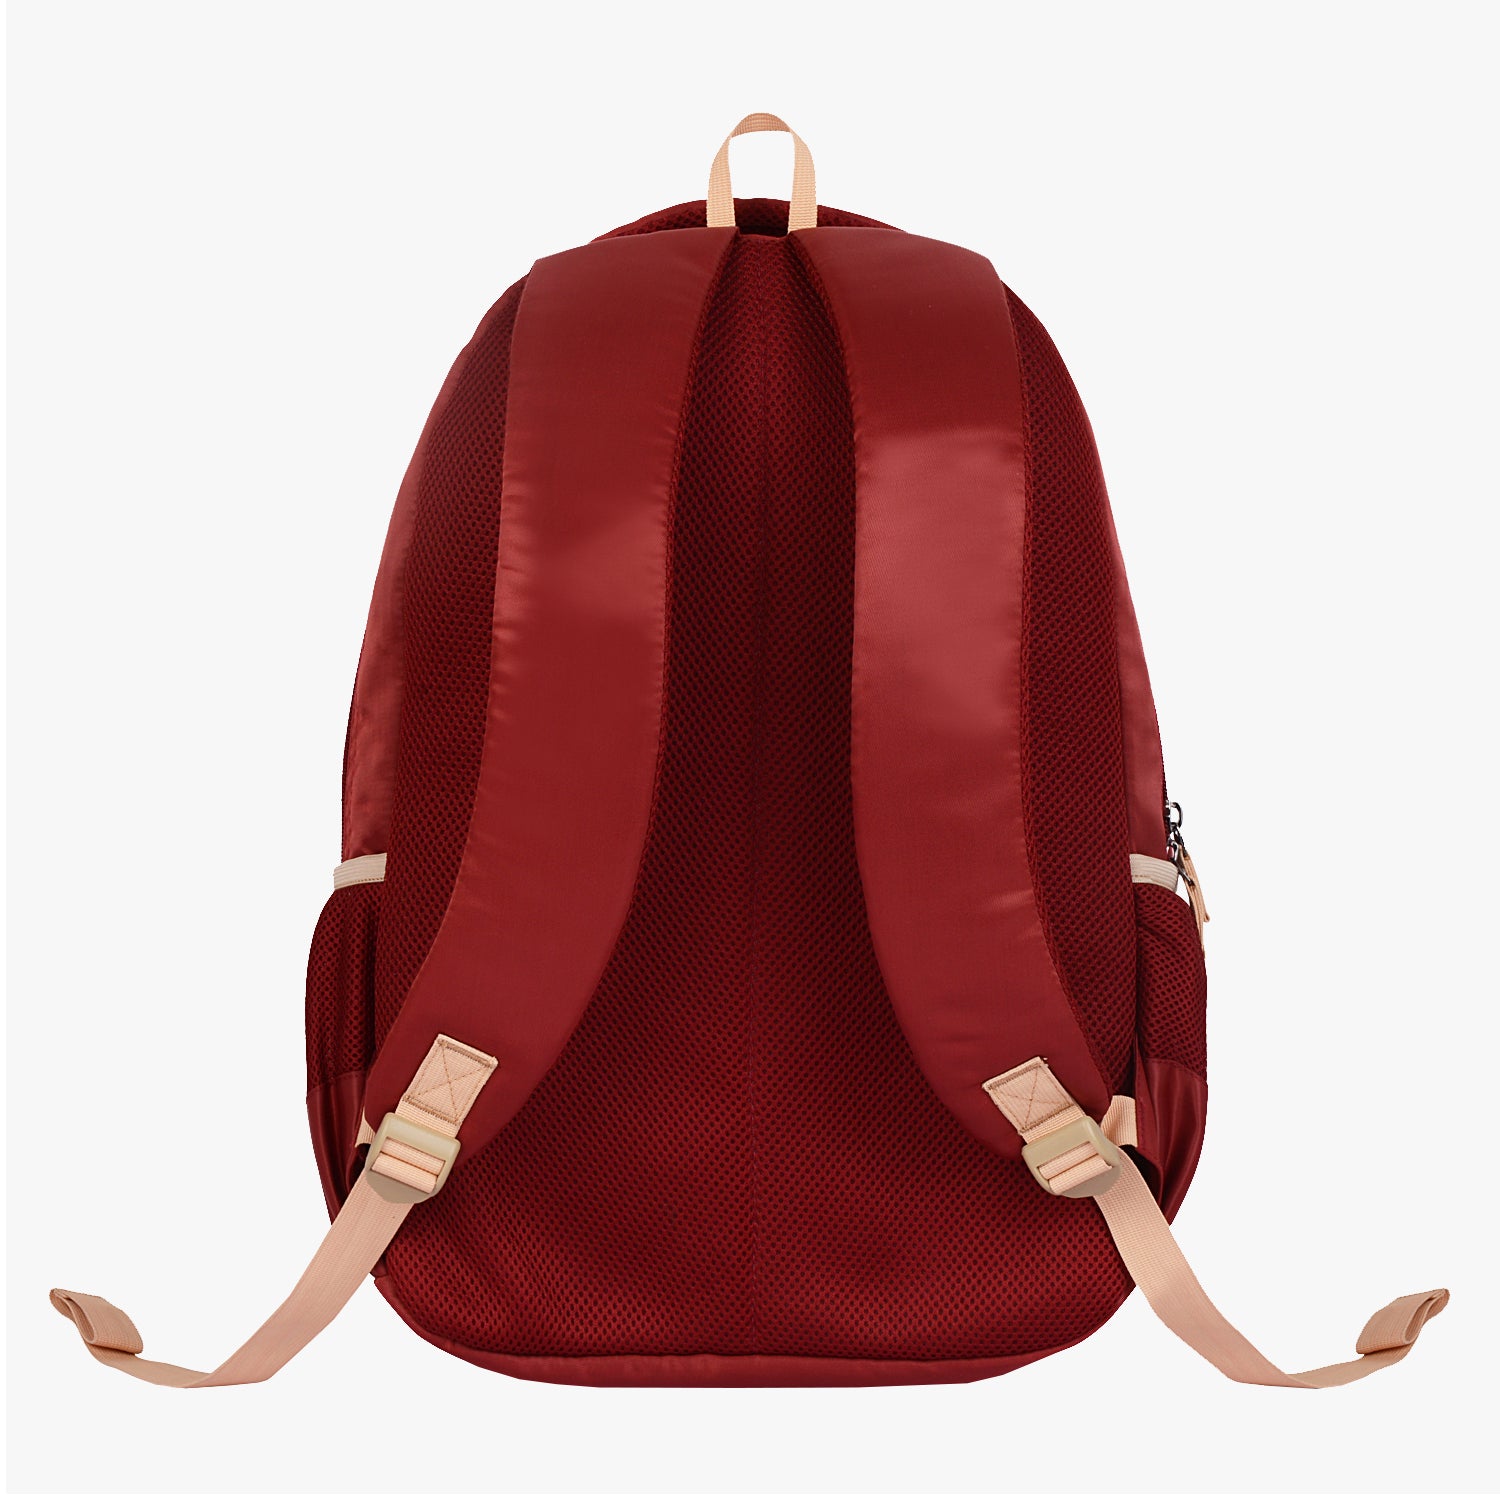 Genie Blush 36L Maroon School Backpack With Easy Access Pockets